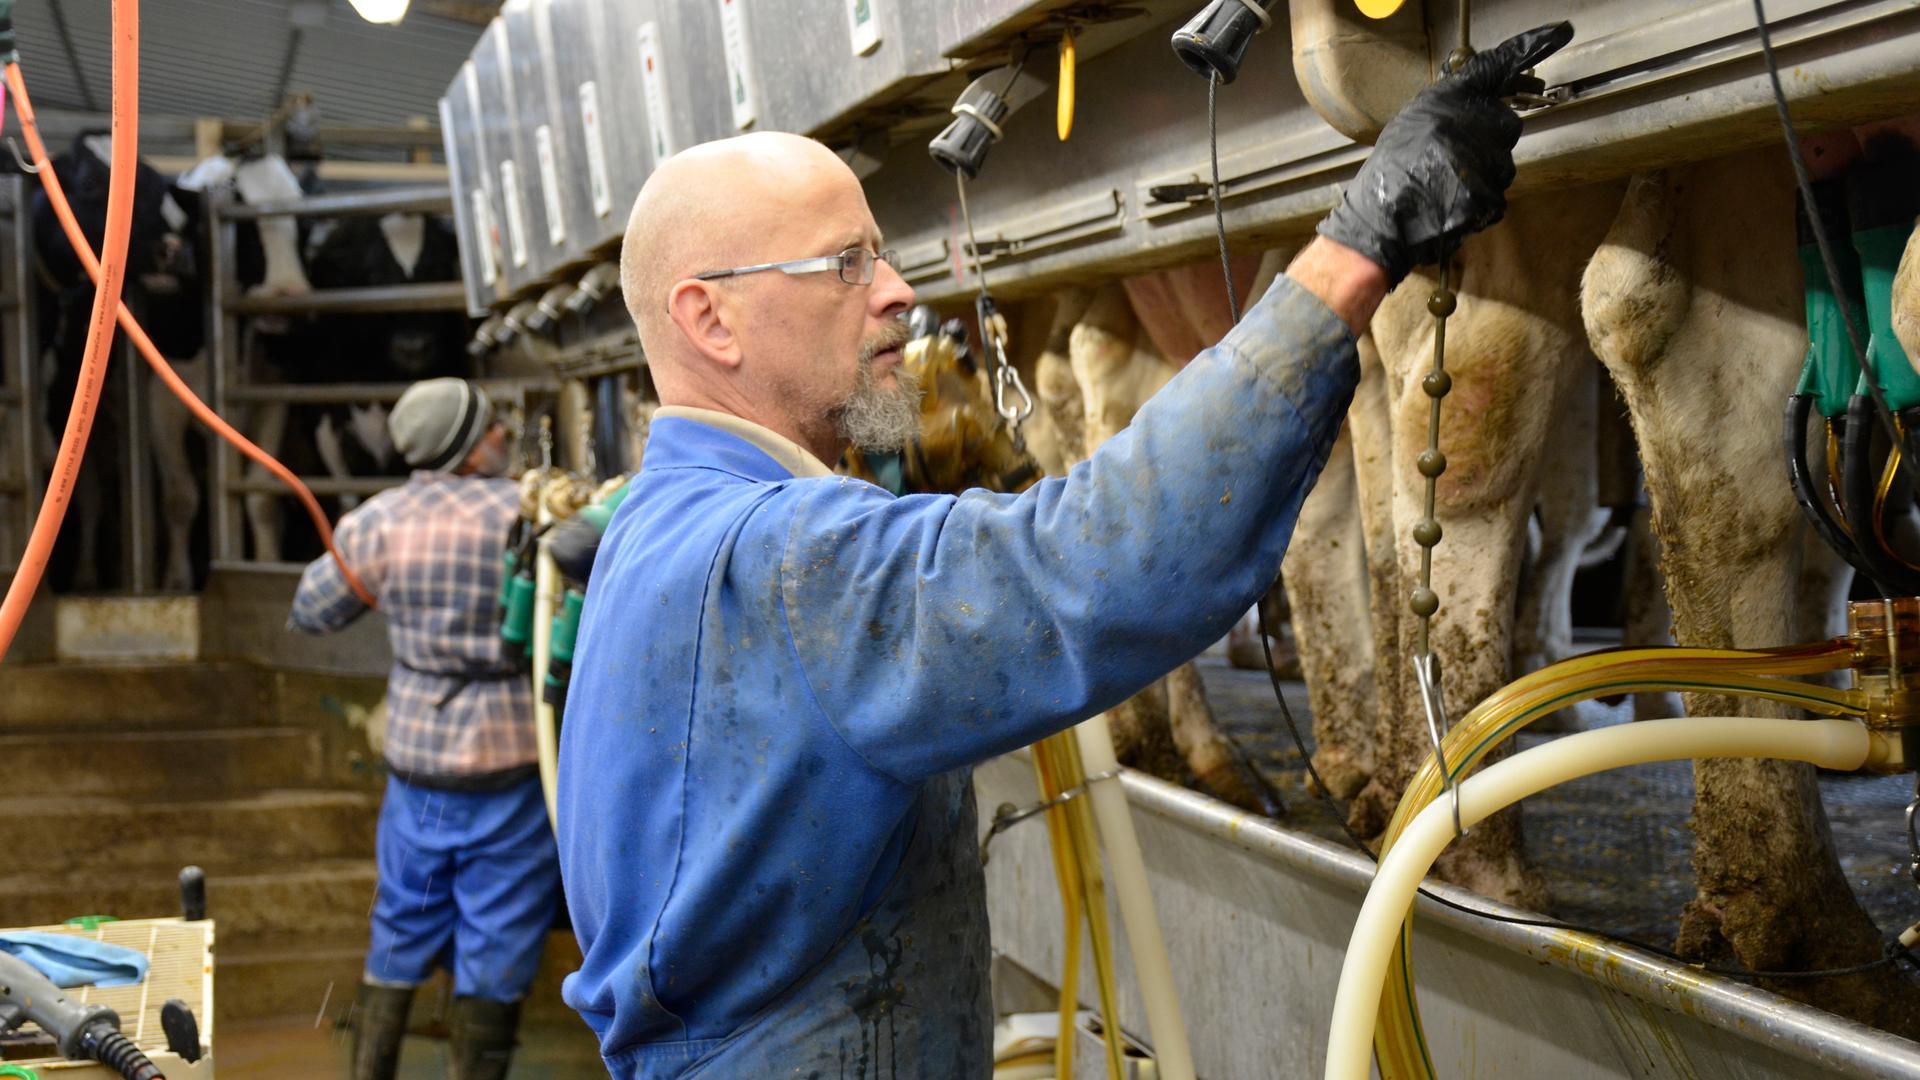 Workers milk cows at Armstrong Manor Farm in Caledon, Ontario. Computers measure how much milk each cow produces, then shut off the milking process when the flow decreases below a certain amount. 